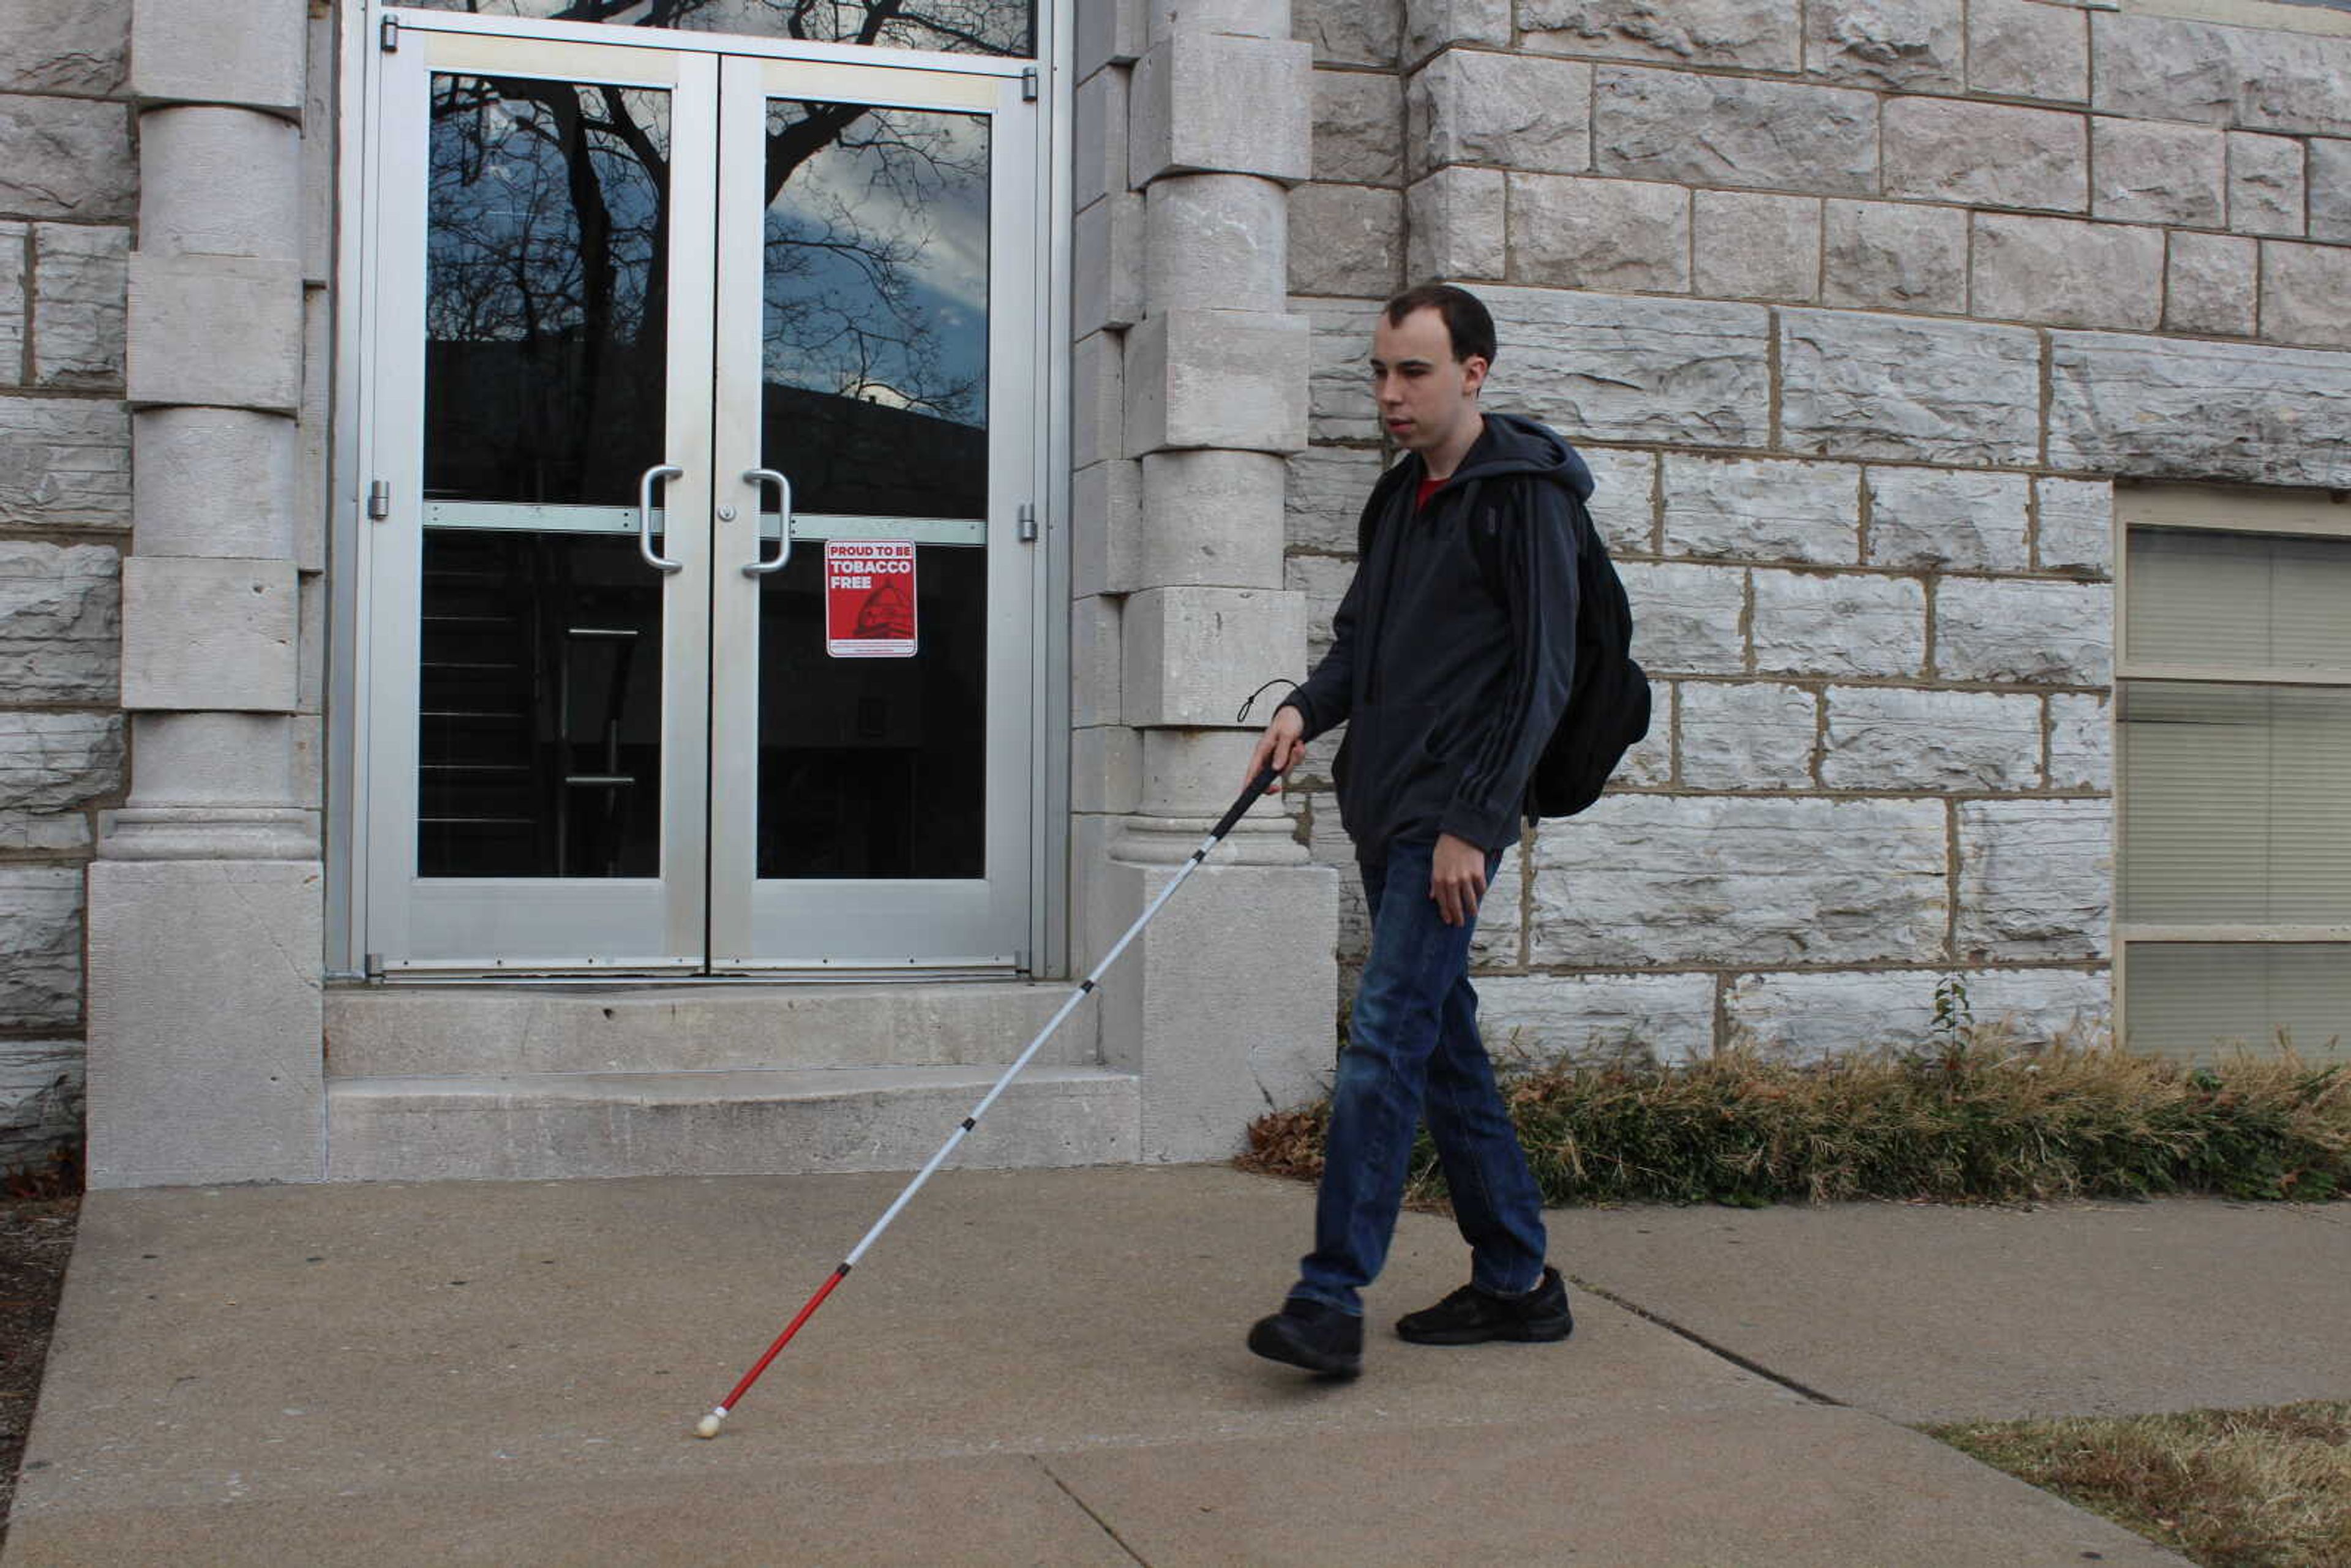 Brandon Hahs uses familiar routes and a walking cane to make his way around campus.